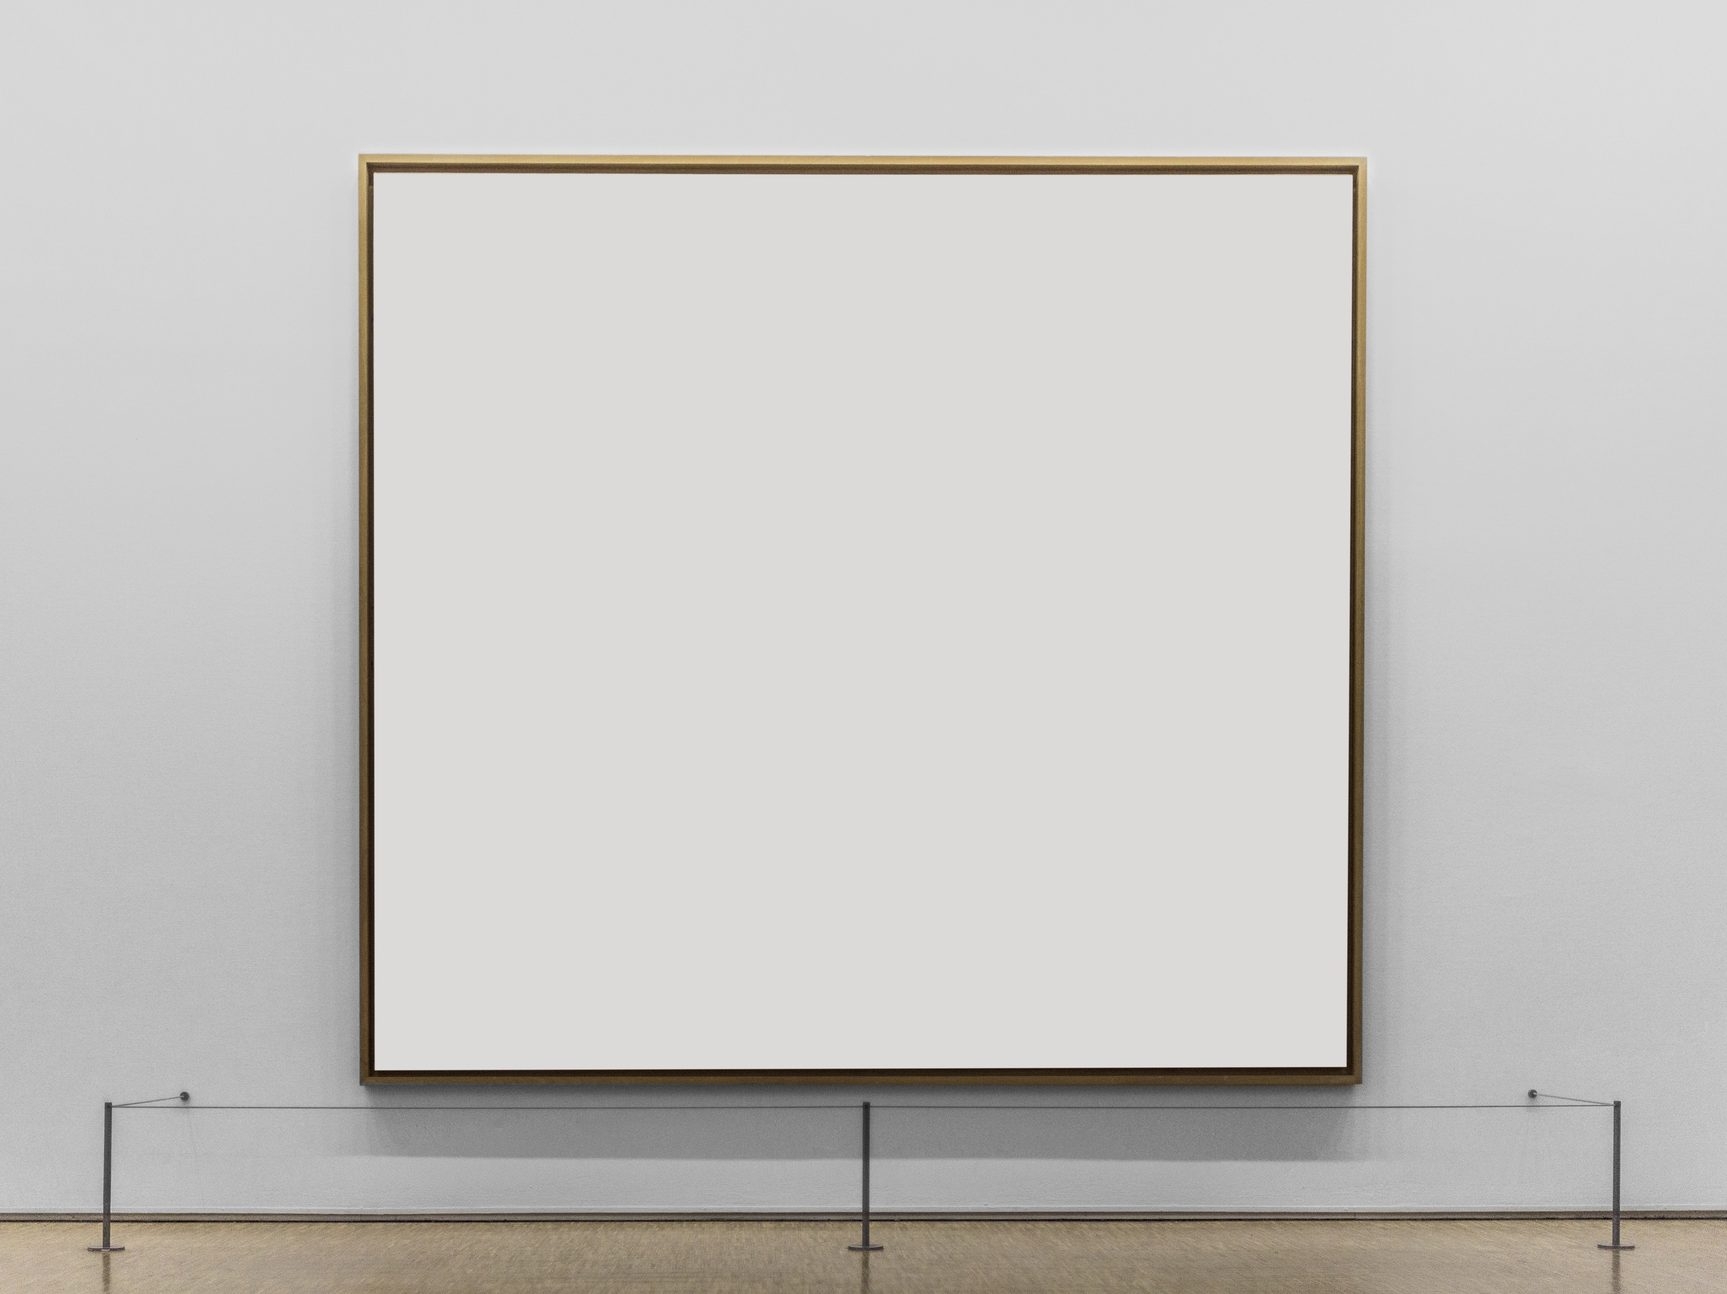 Artist Takes Museum's $84,000, Returns With Blank Canvases Titled